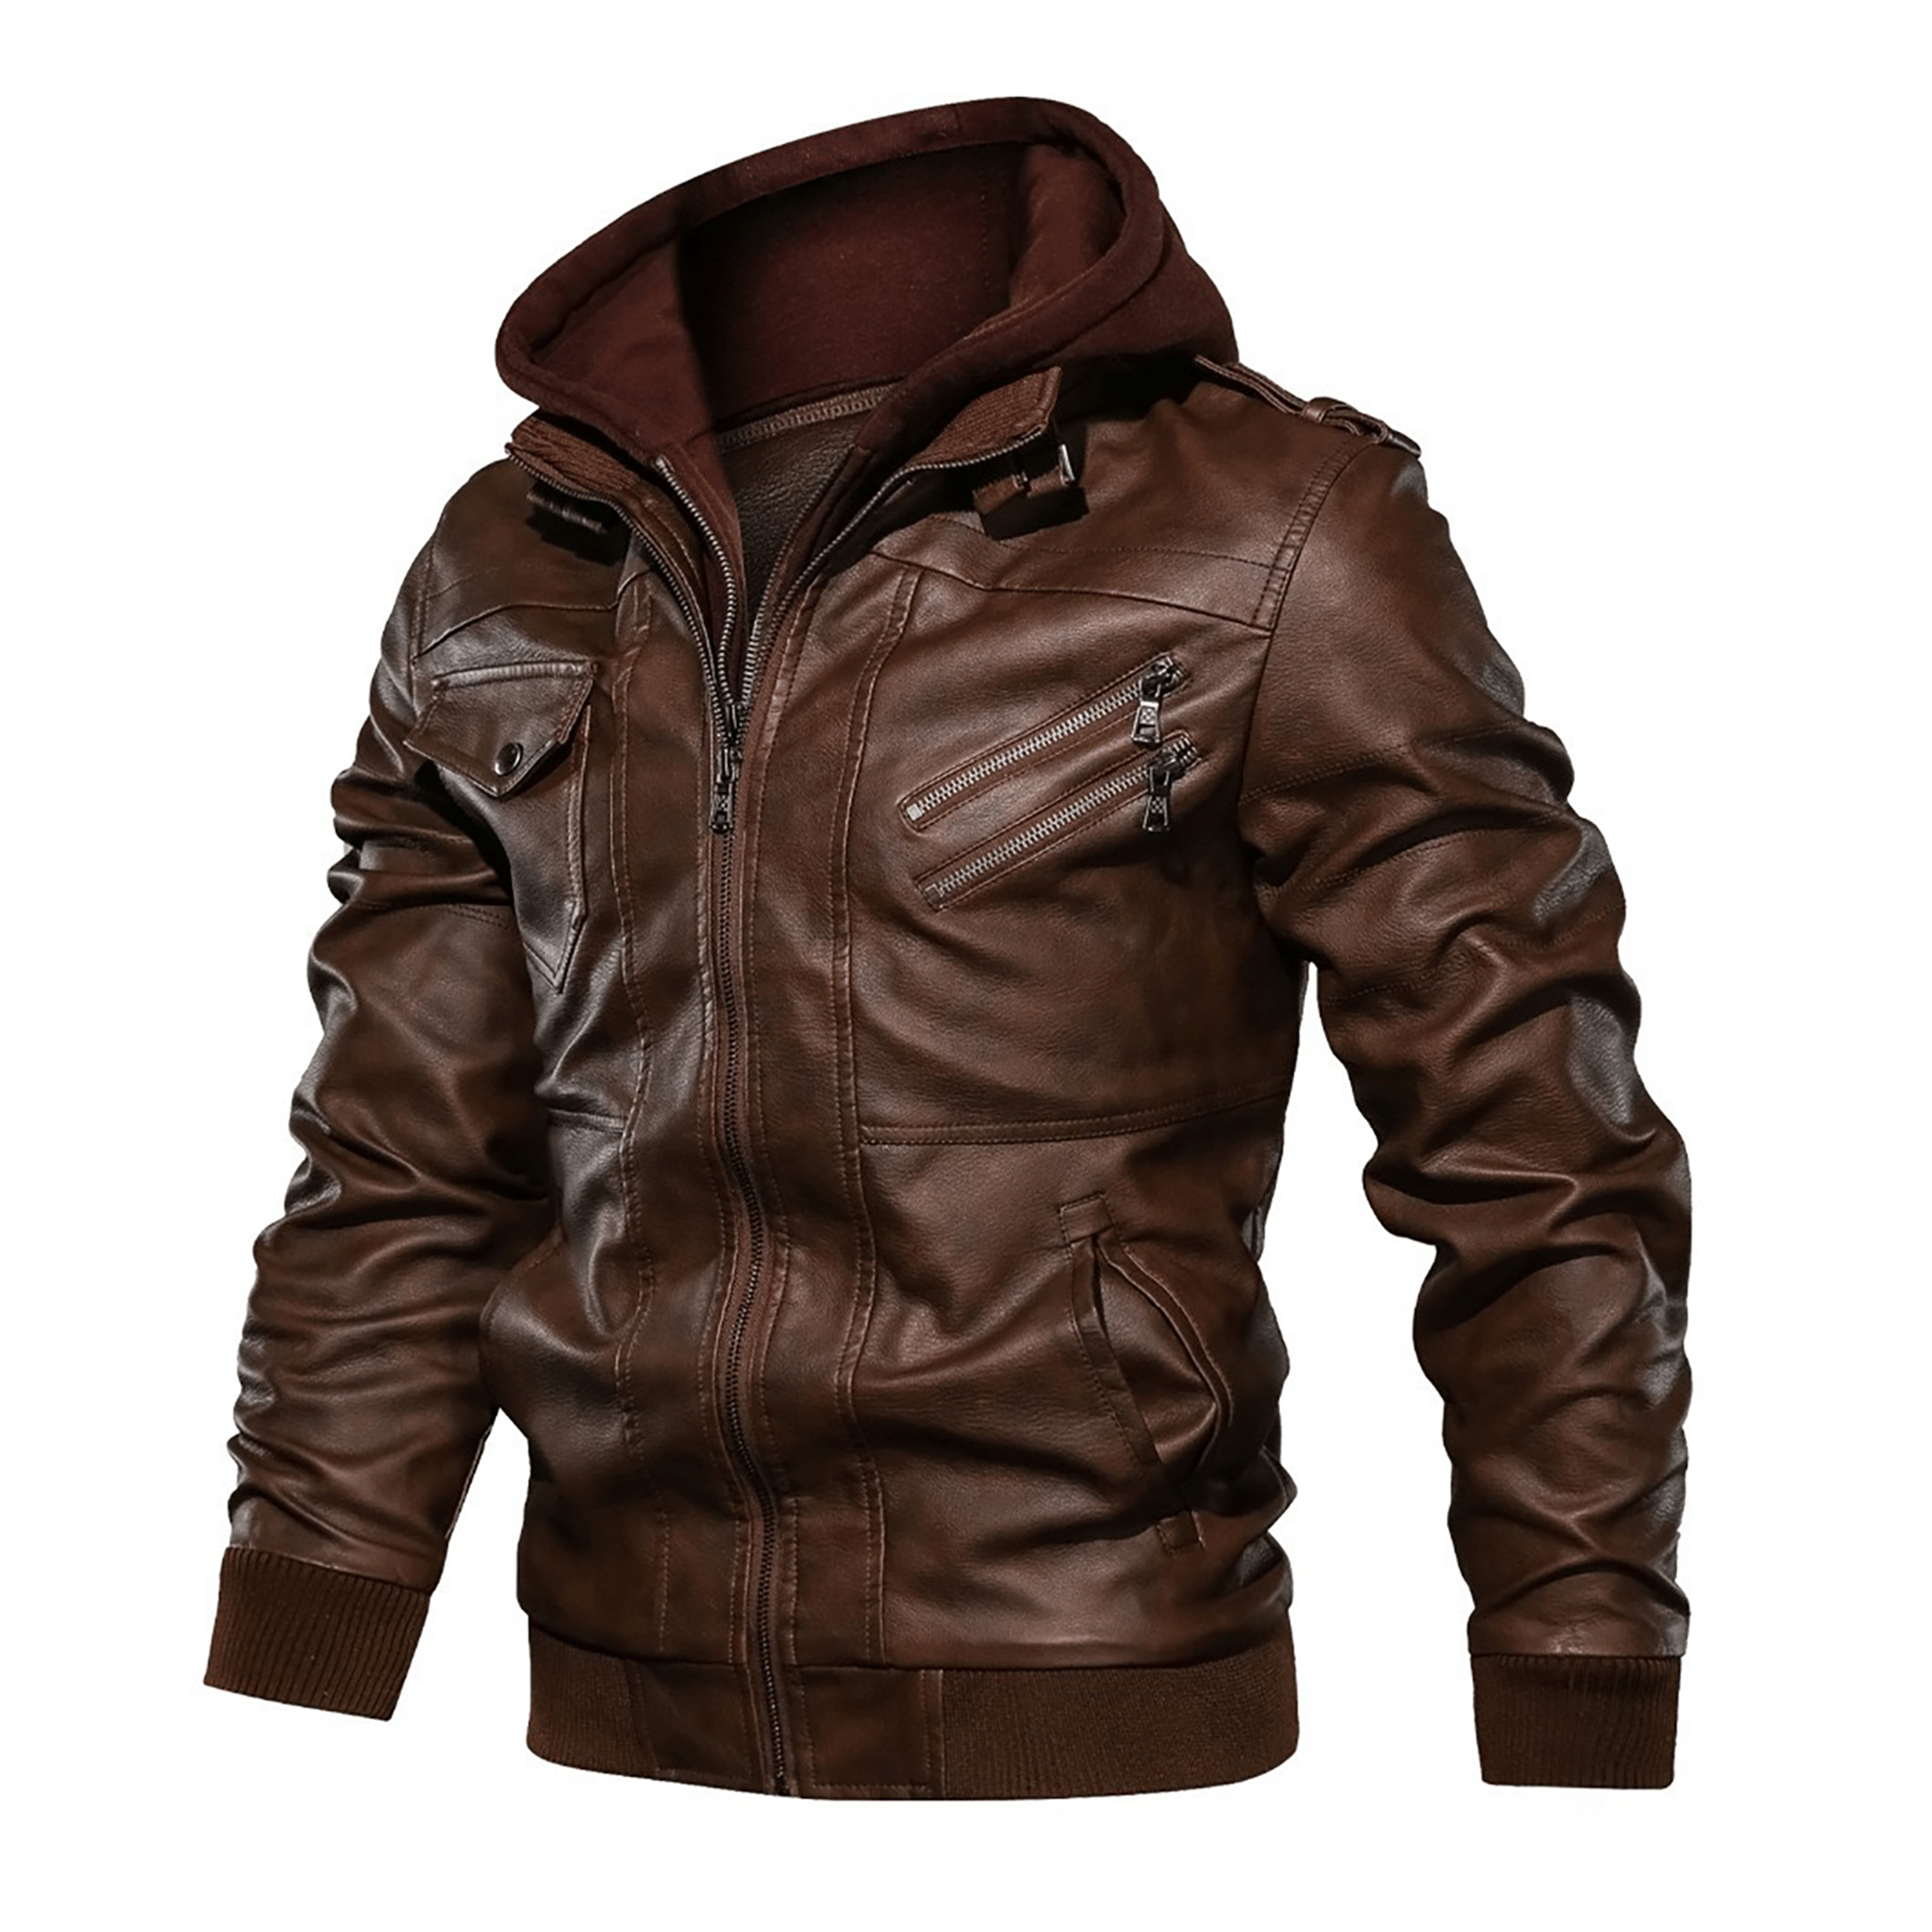 Top leather jackets and latest products 153